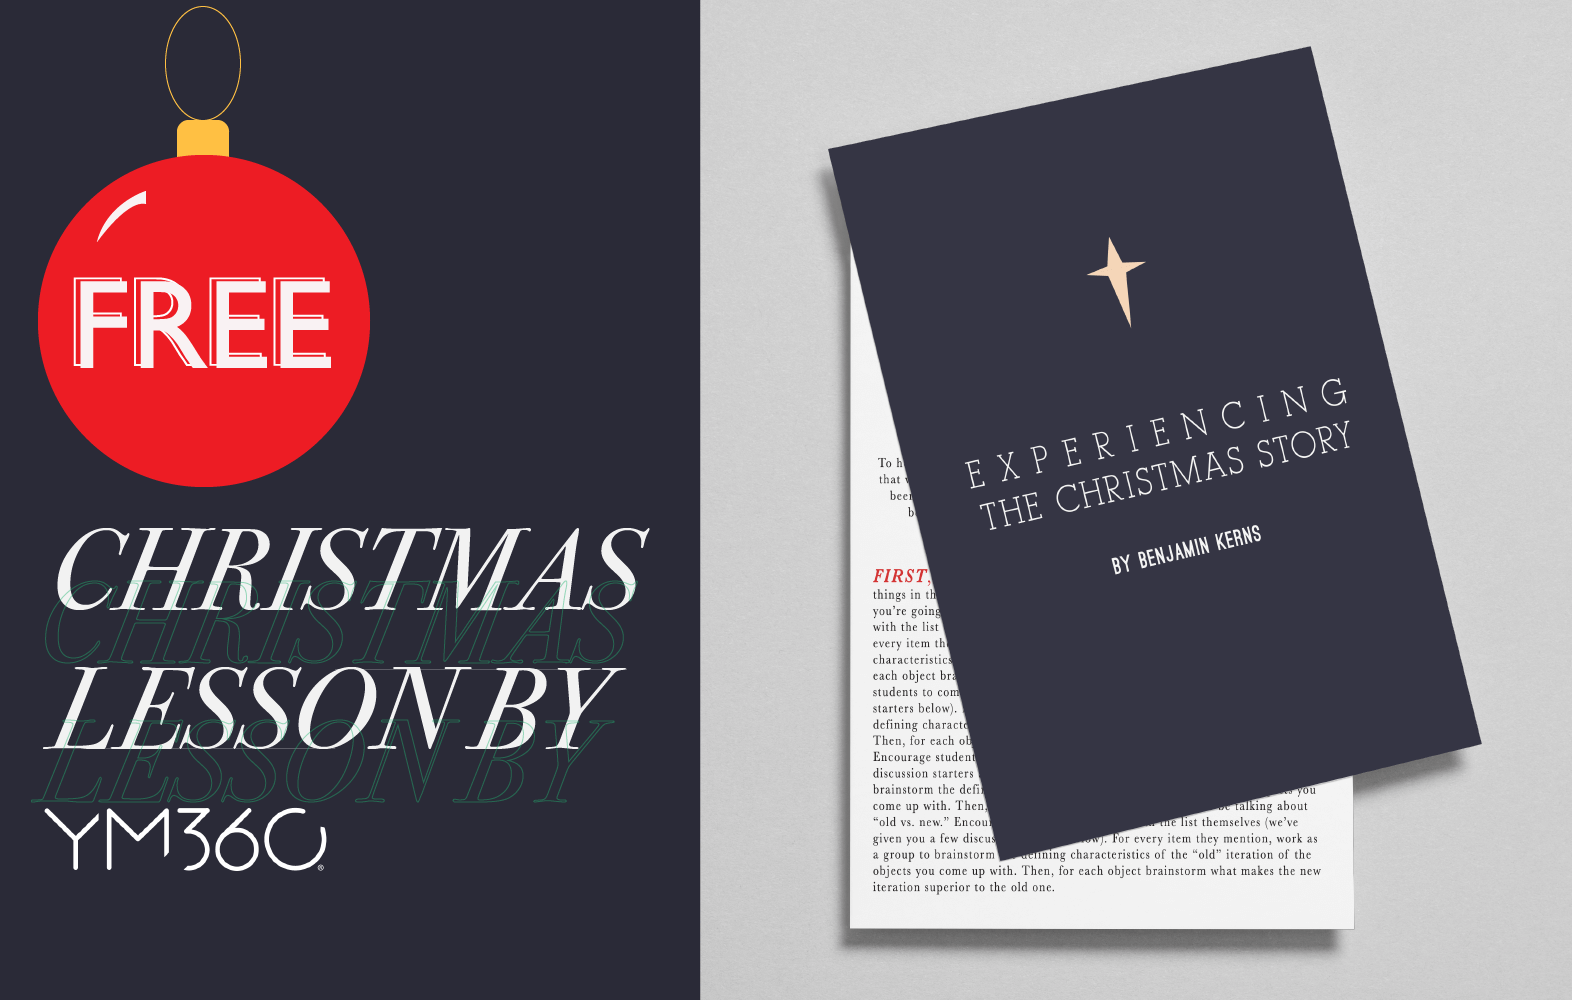 Free Christmas Lesson | Experiencing the Christmas Story